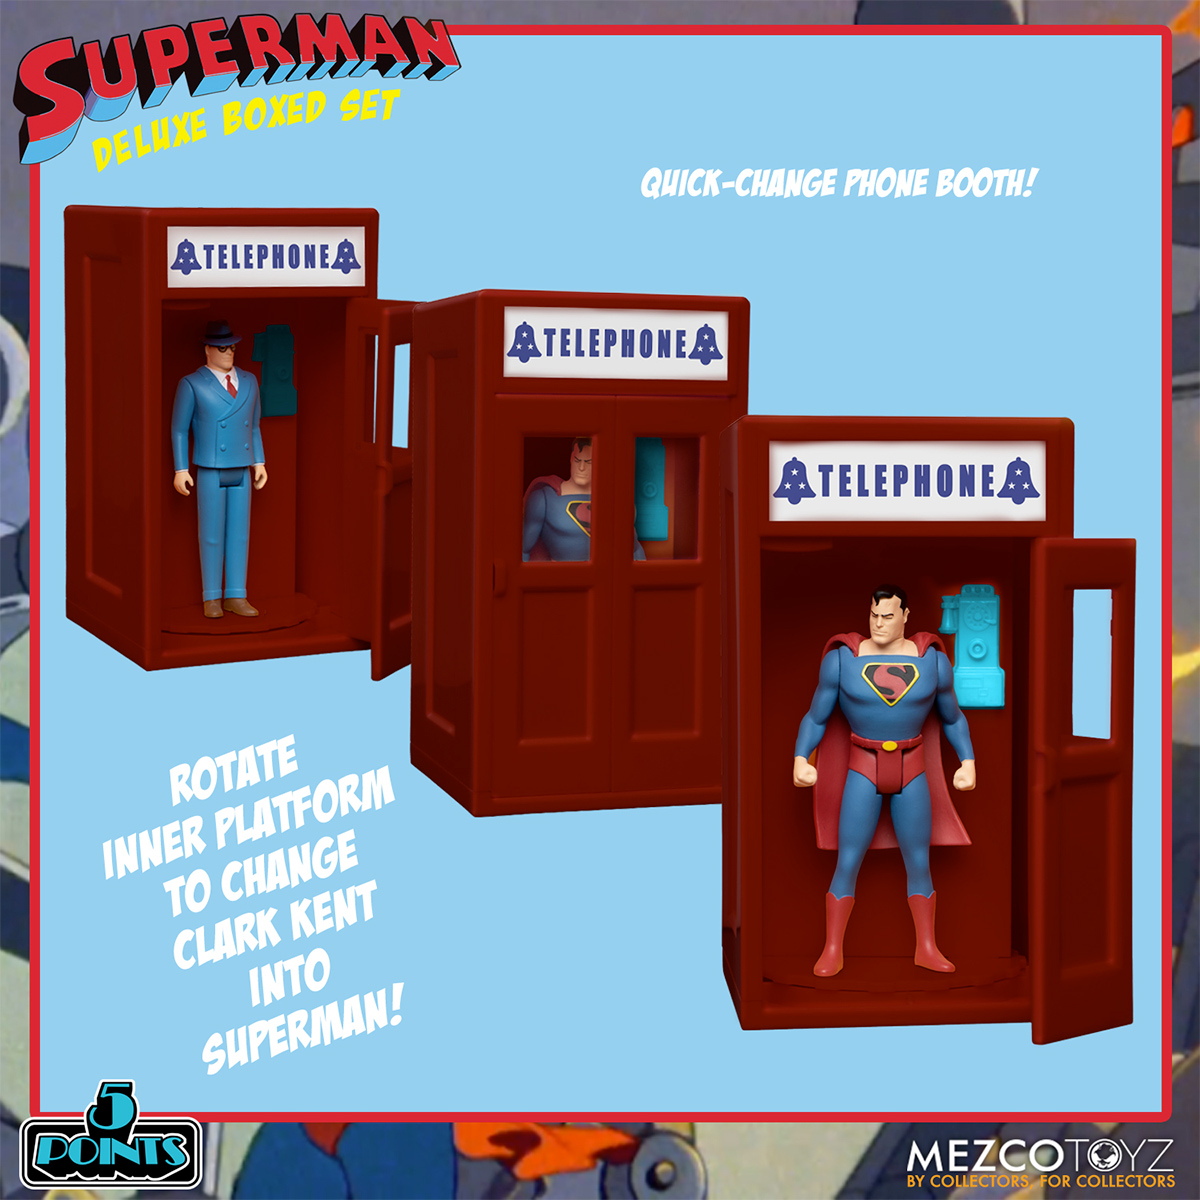 Superman - The Mechanical Monsters (1941) 5 Points Figures Deluxe Boxed Set